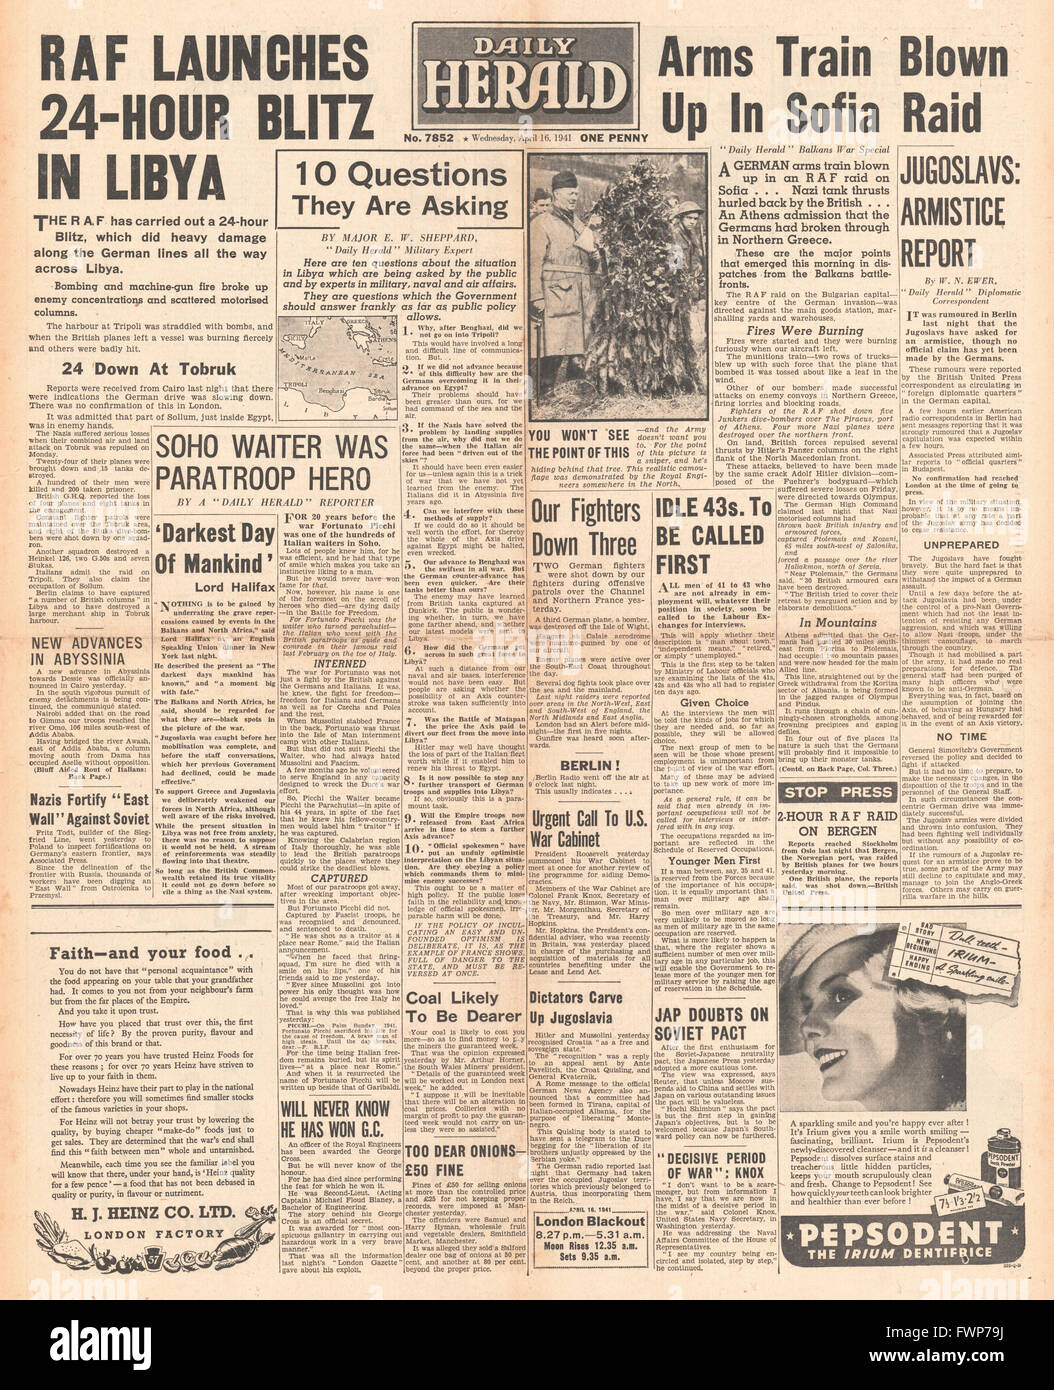 1941 front page Daily Herald RAF attack German forces in Libya and arms train in Sofia Stock Photo